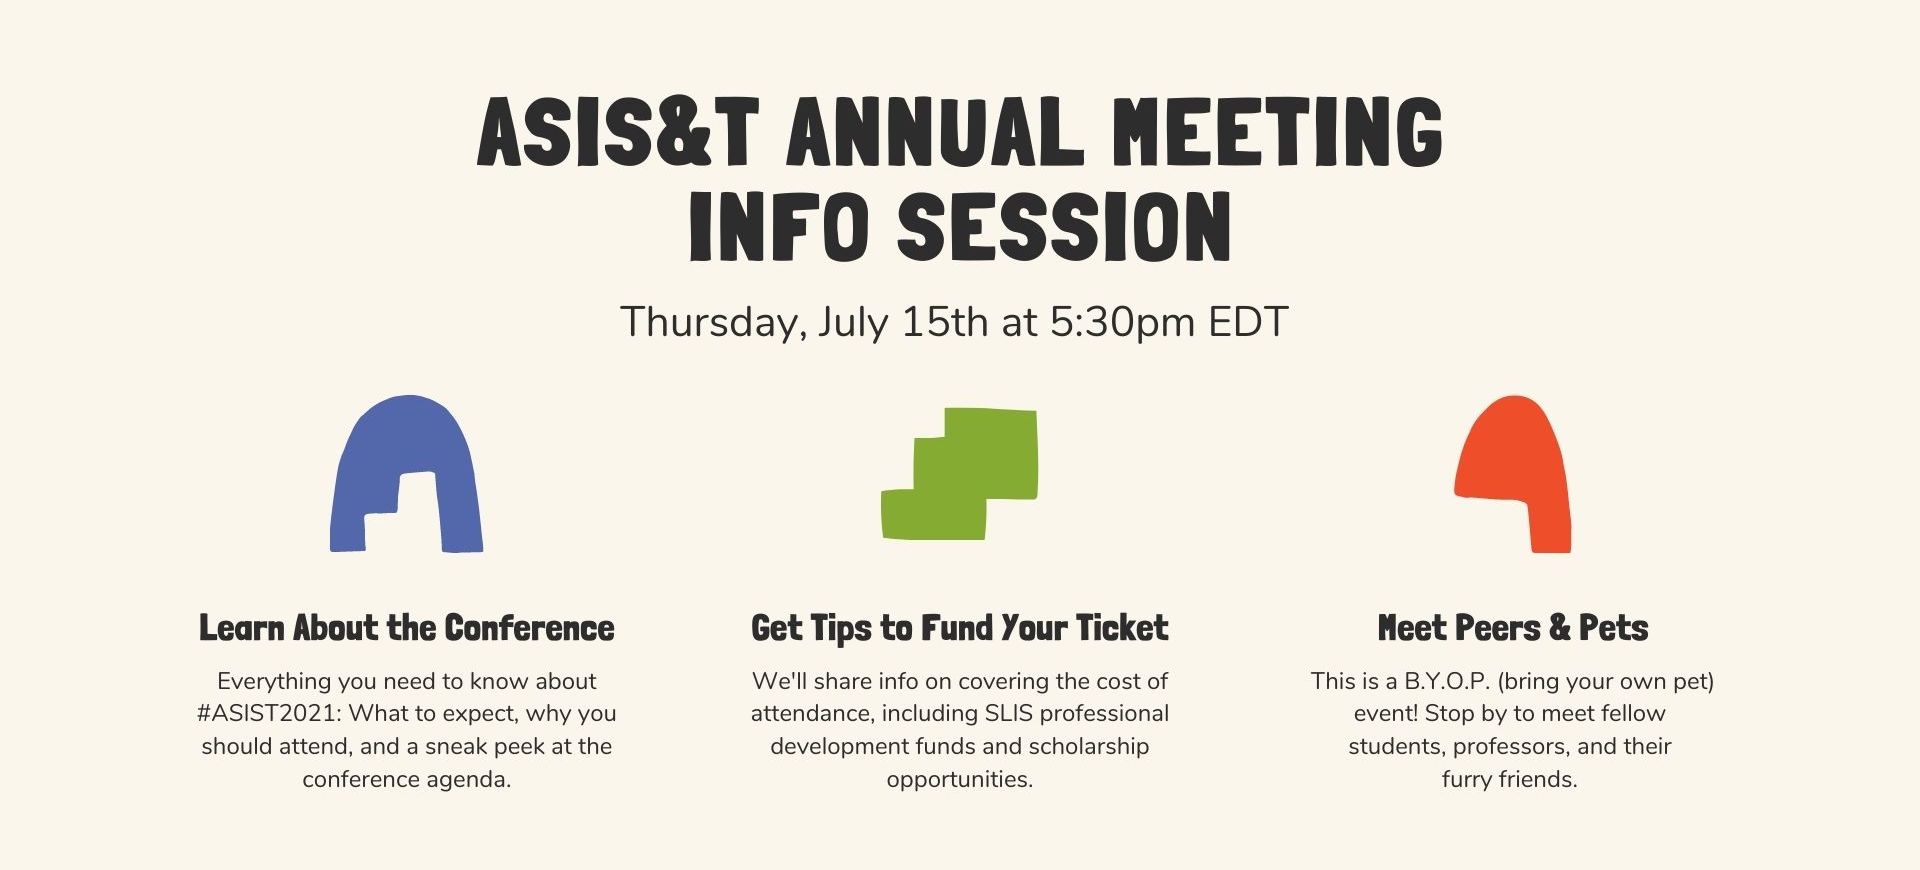 ASIS&T Annual Meeting Info Session. Thursday, Jul 15 at 5:30pm EDT. Learn about the Conference: Everything you need to know about #ASIS&T2021: What to expect, why you should attend, and a sneak peek at the conference agenda. Get Tips to Fund Your Ticket: We'll share info on covering the cost of attendance, including SLIS professional development funds and scholarship opportunities. Meet Peers & Pets. This is a BYOP (bring your own pet) event! Stop by to meet fellow students, professors, and their furry friends.